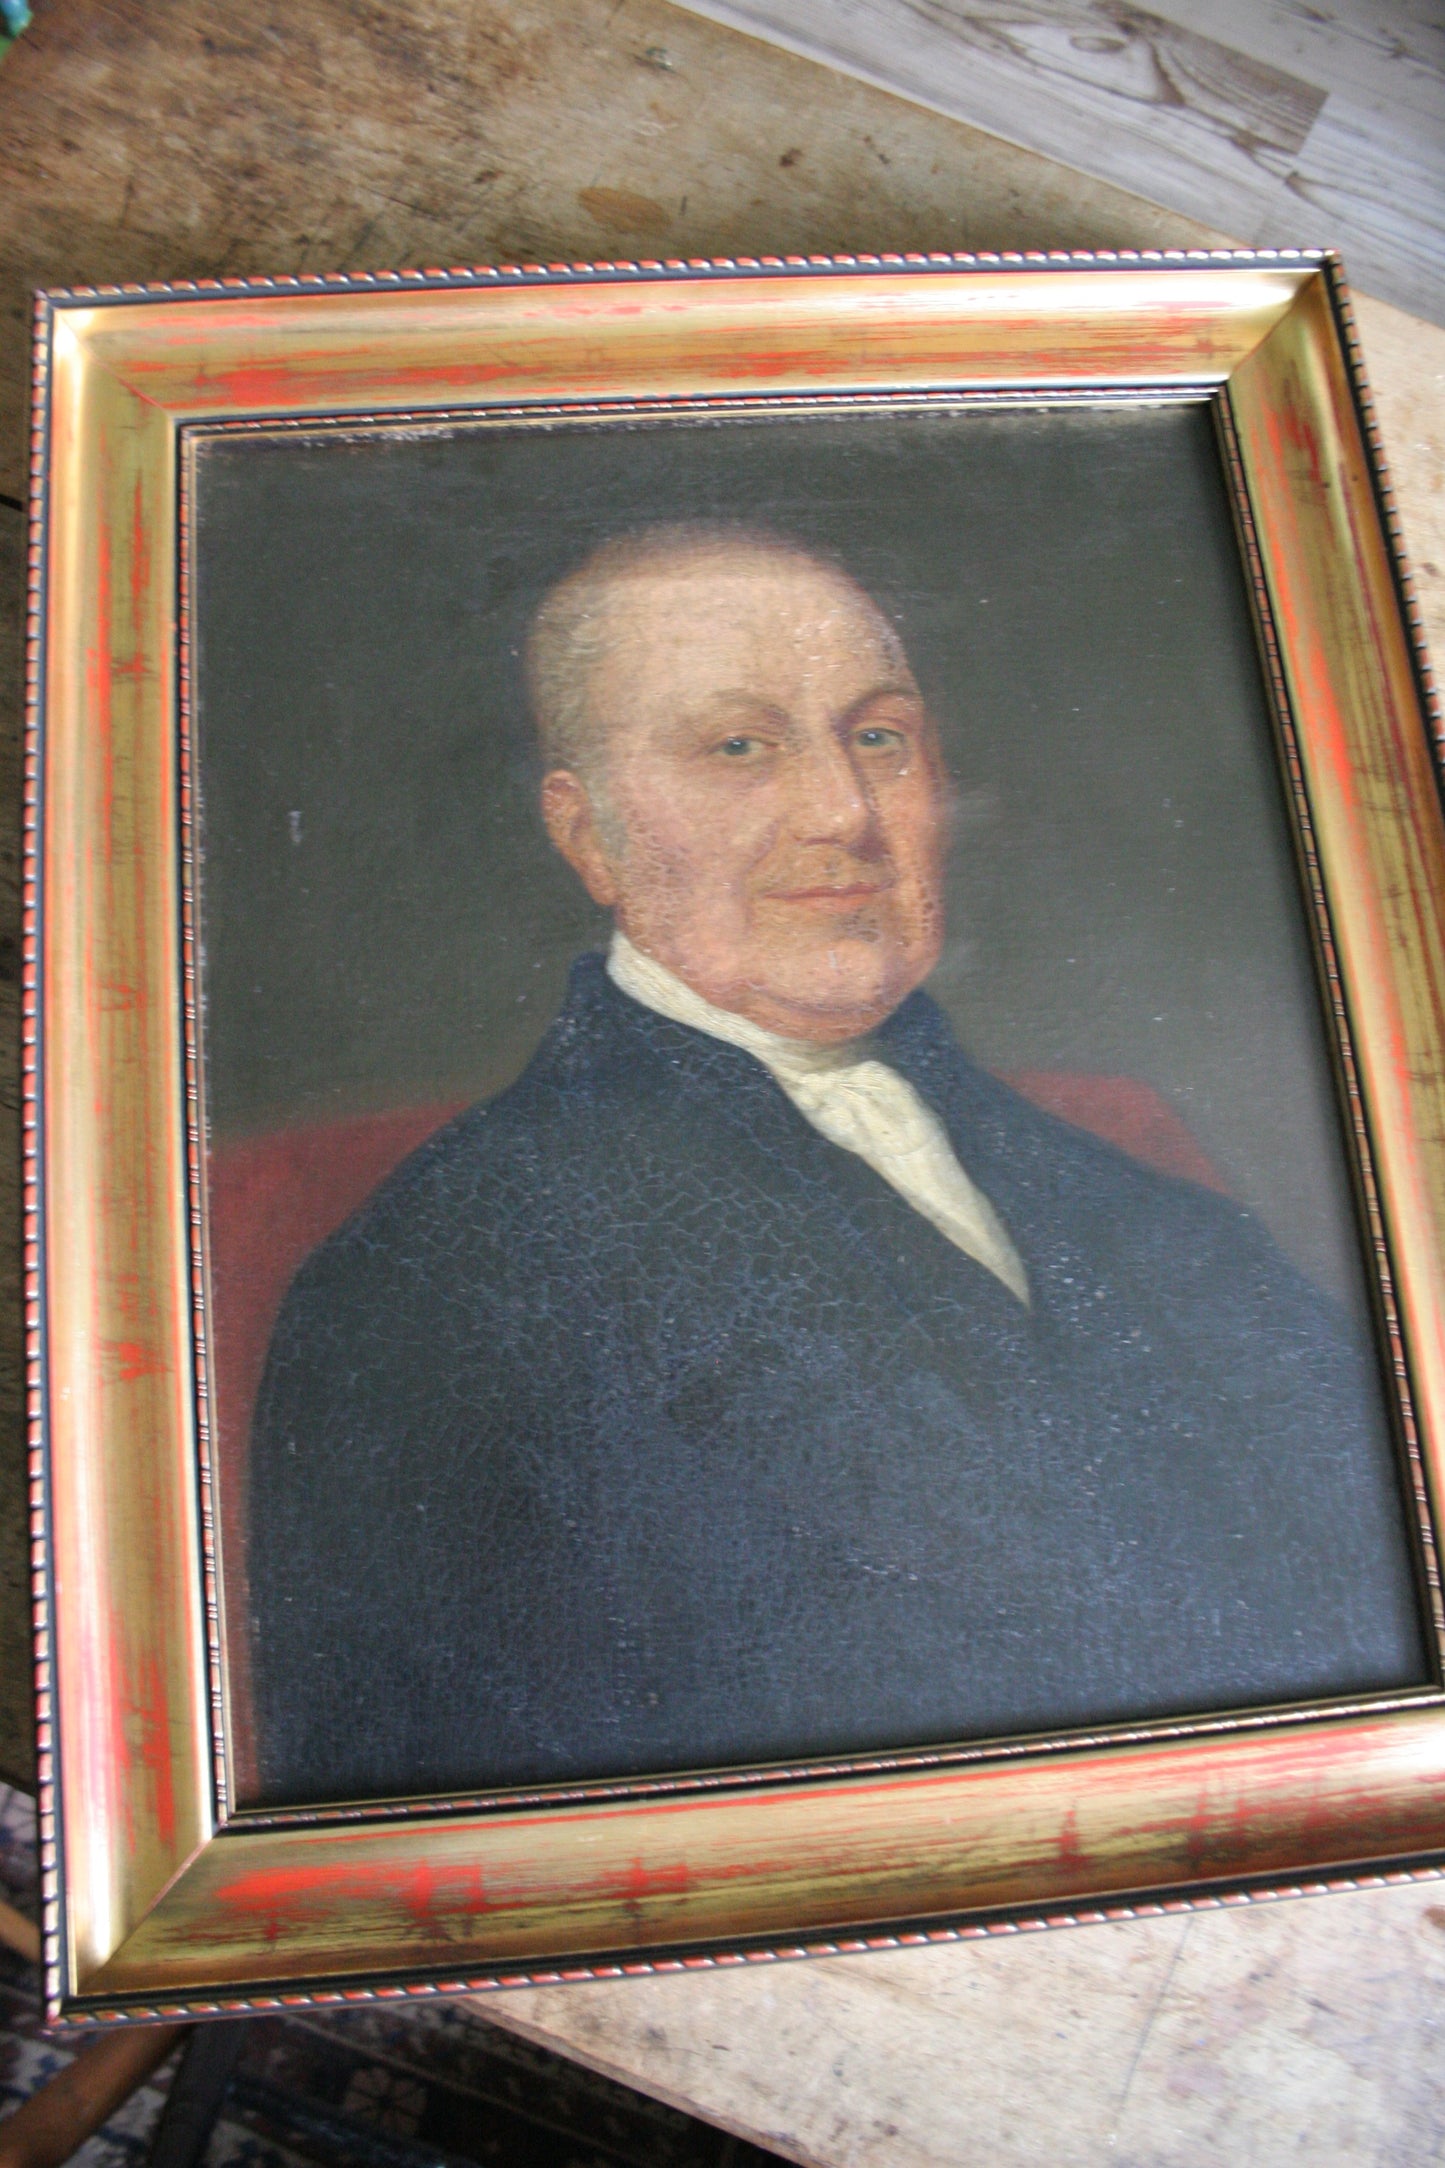 Antique large portrait painting of gentleman on canvas in frame